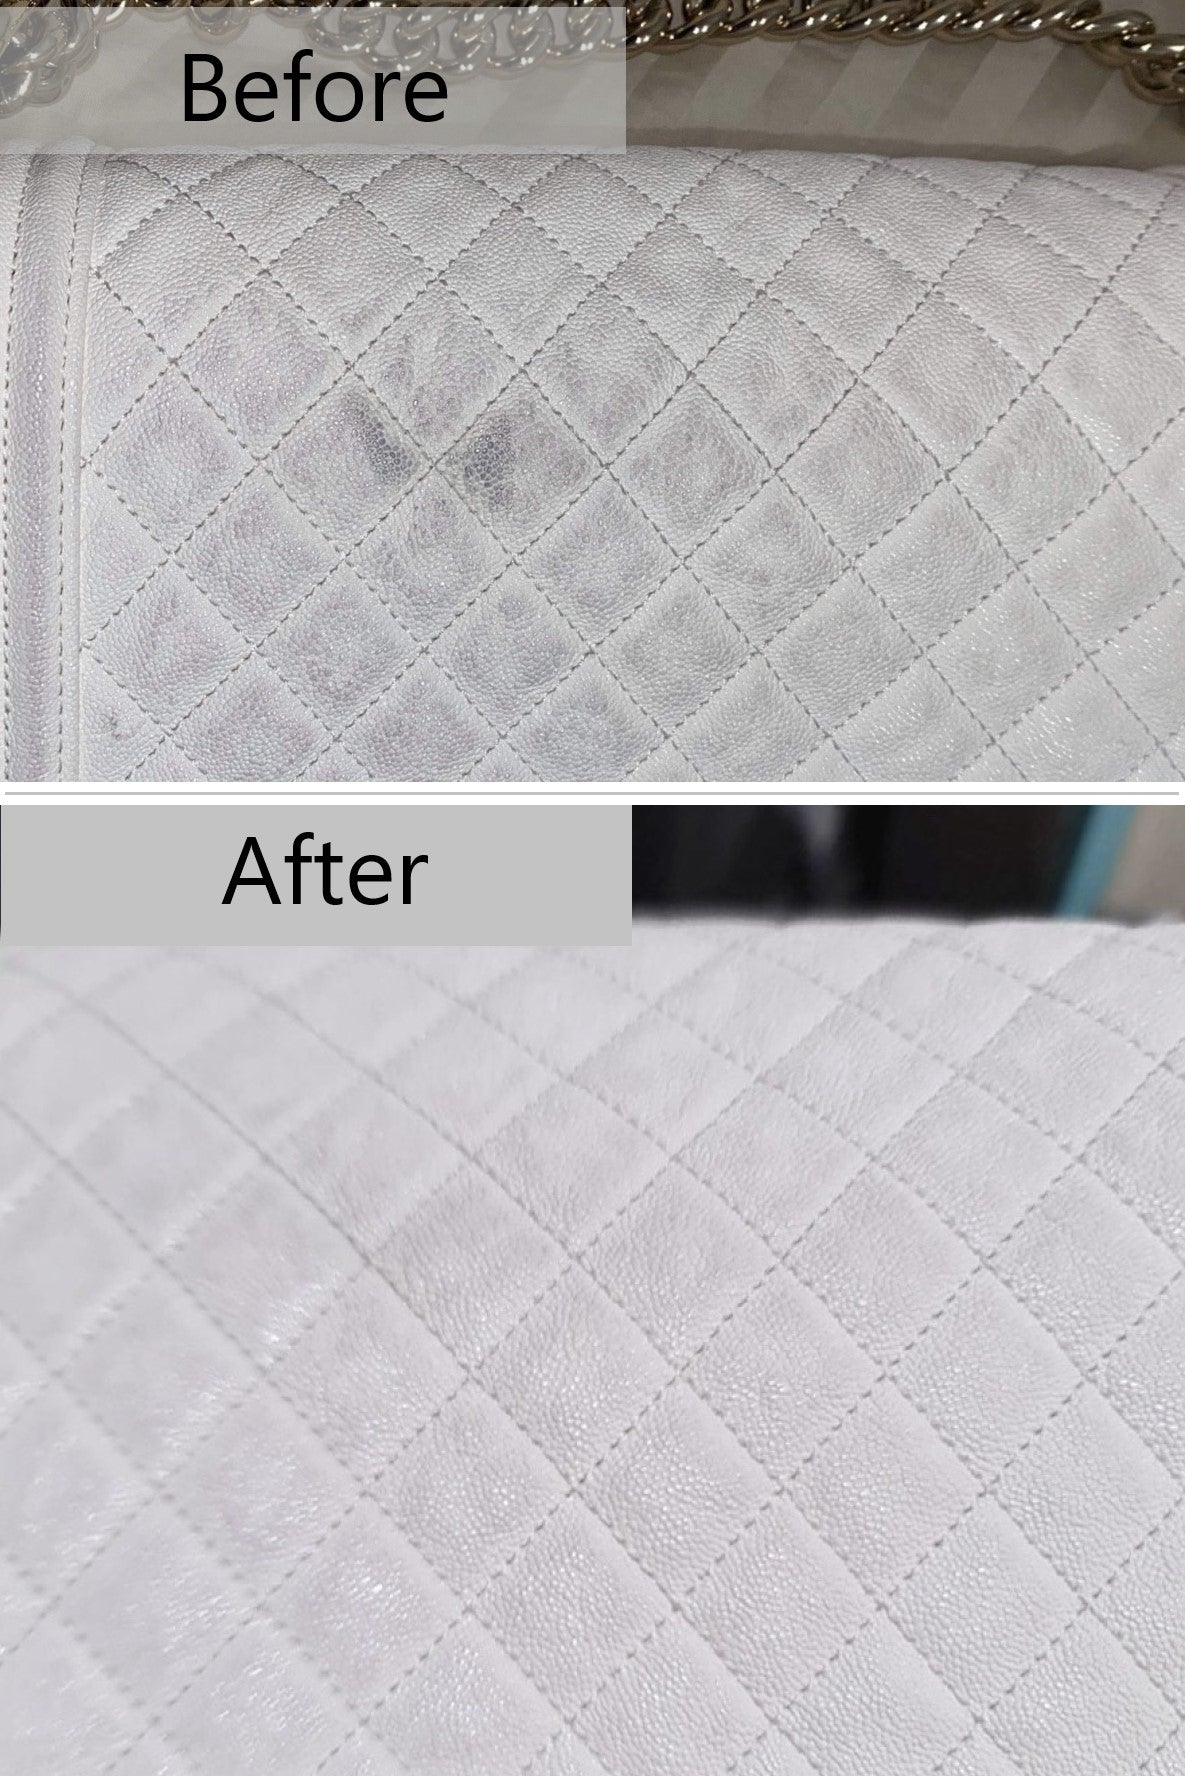 3 Simple Steps To Remove Colour Transfer, Dirt, and Stains on White Leather  Luxury Bags - BagAddicts Anonymous